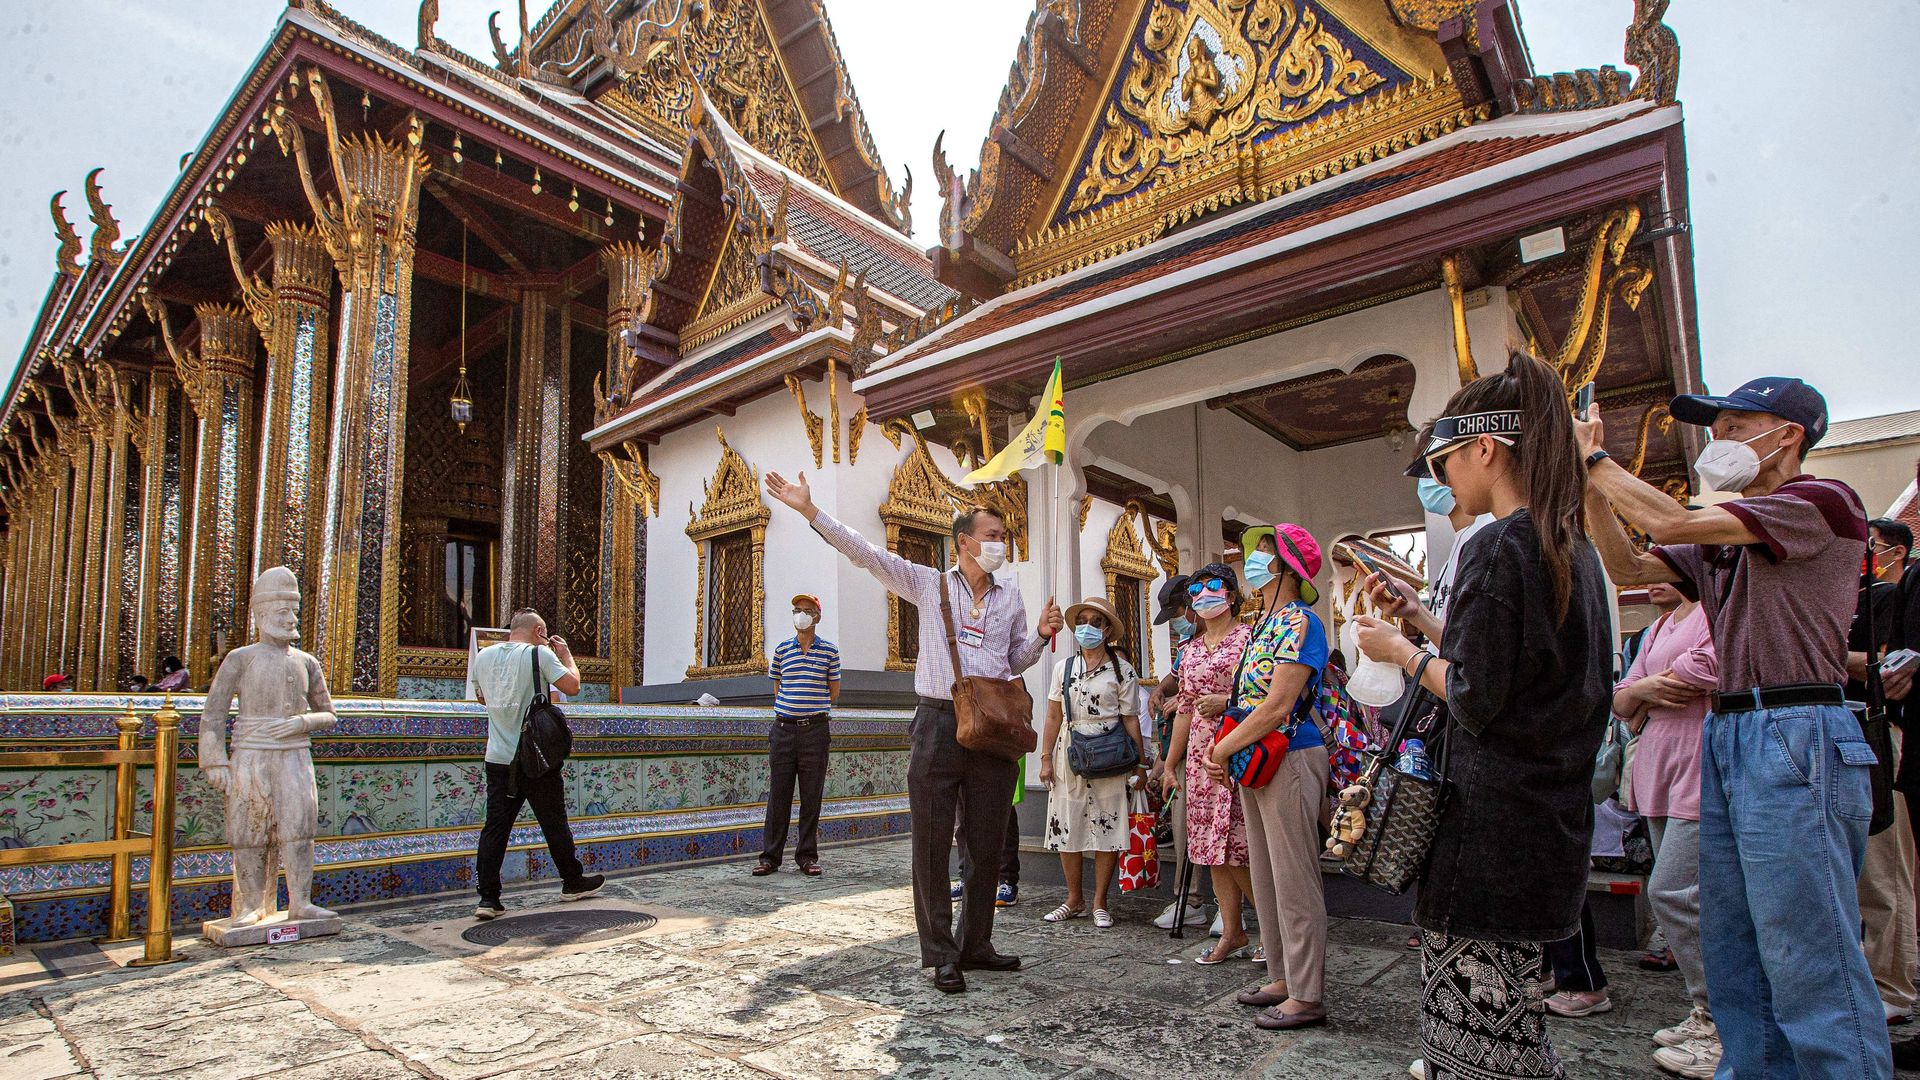 Chinese tourists visit the Grand Palace in Bangkok, Thailand